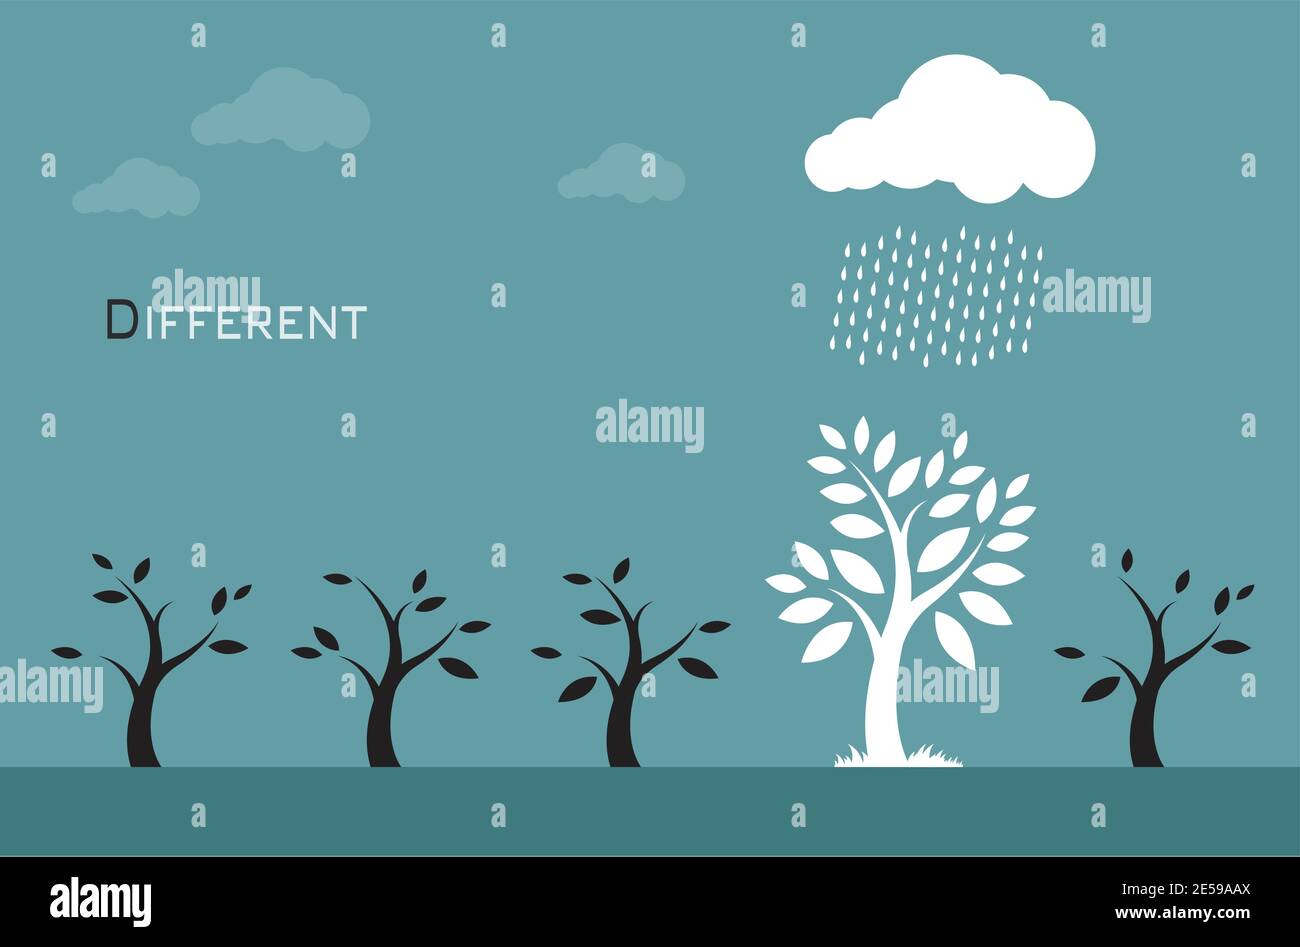 Vector images of trees, clouds and rain. Different concepts Stock Vector